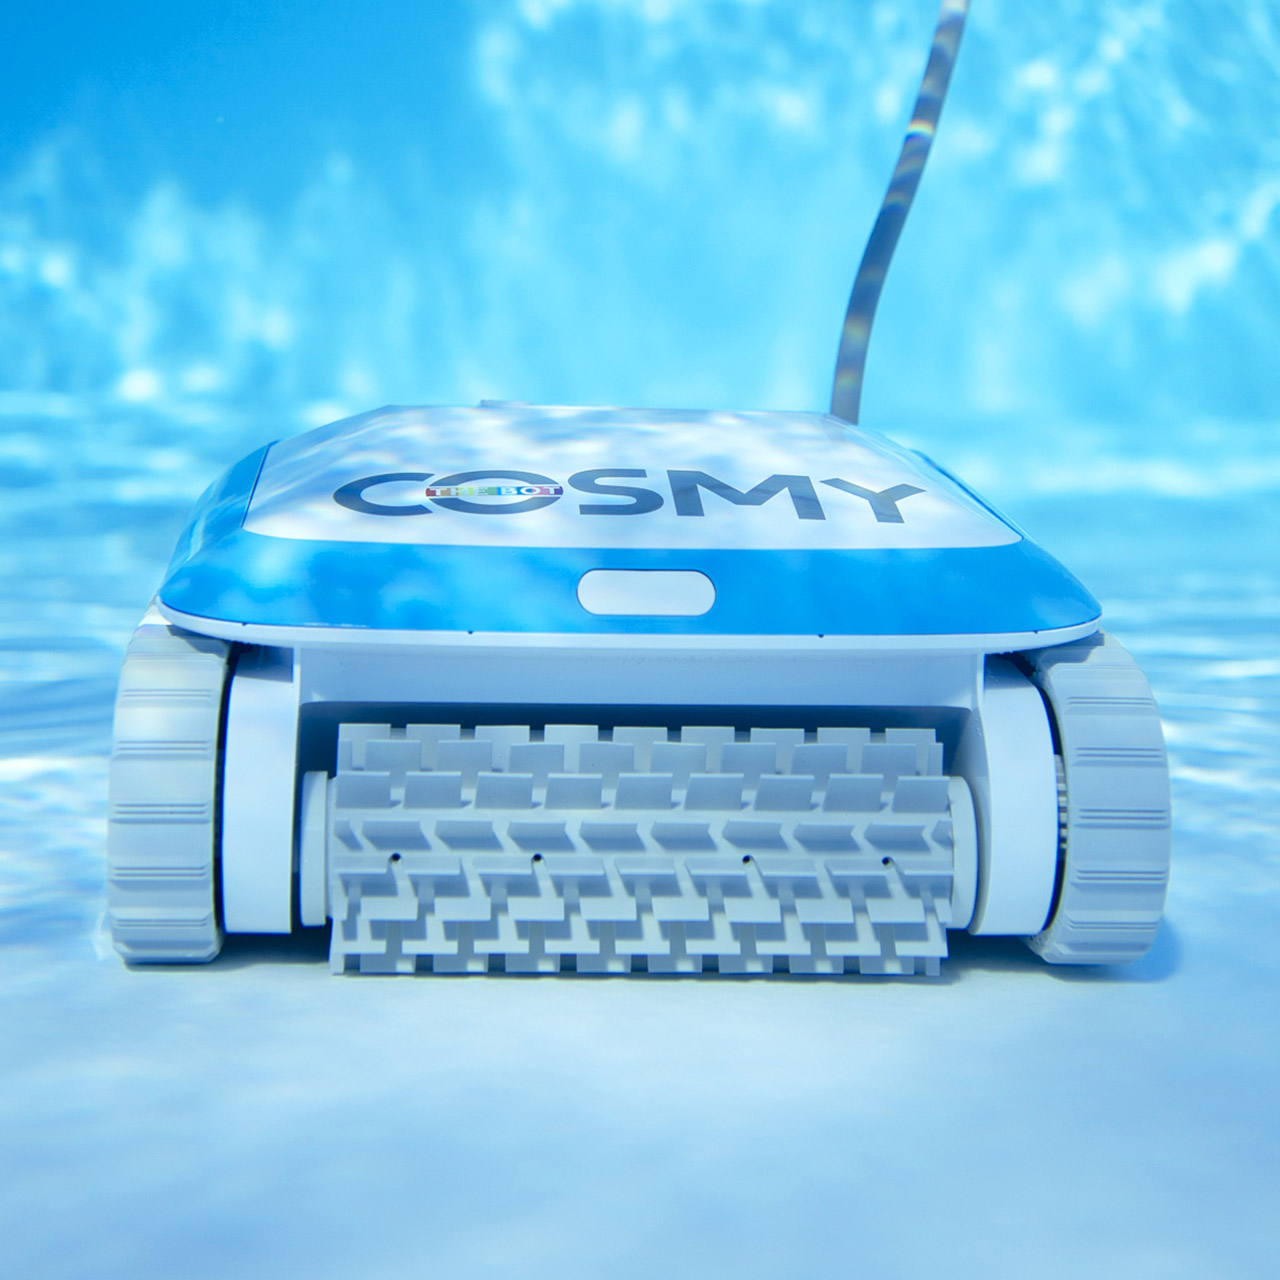 BWT Poolroboter Cosmy 250